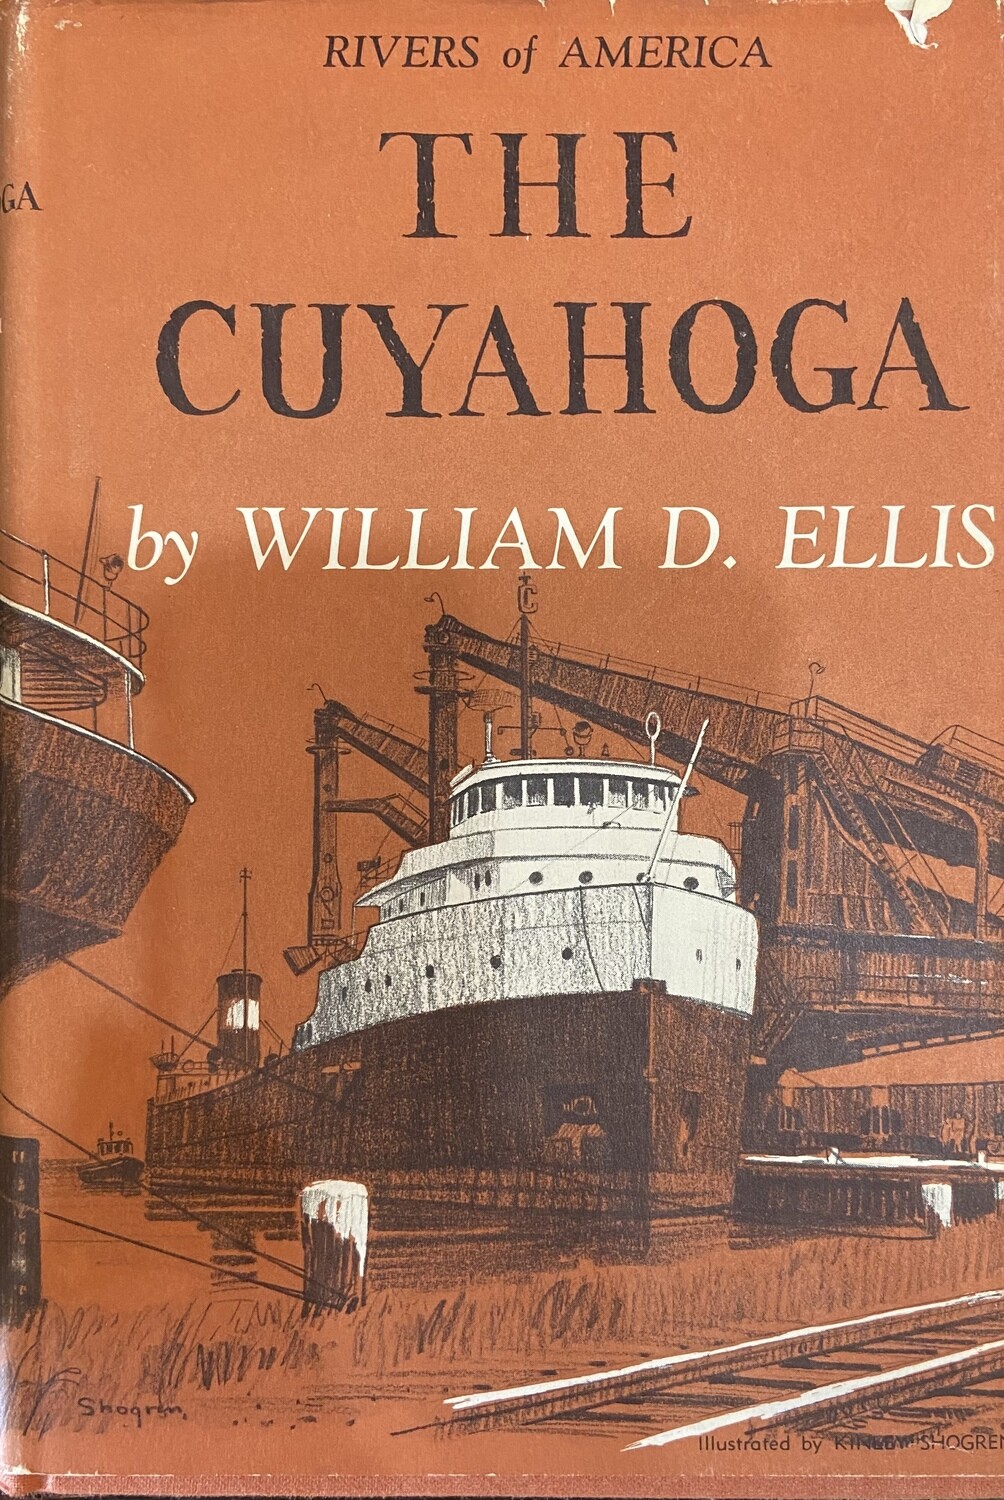 Rivers of America: The Cuyahoga